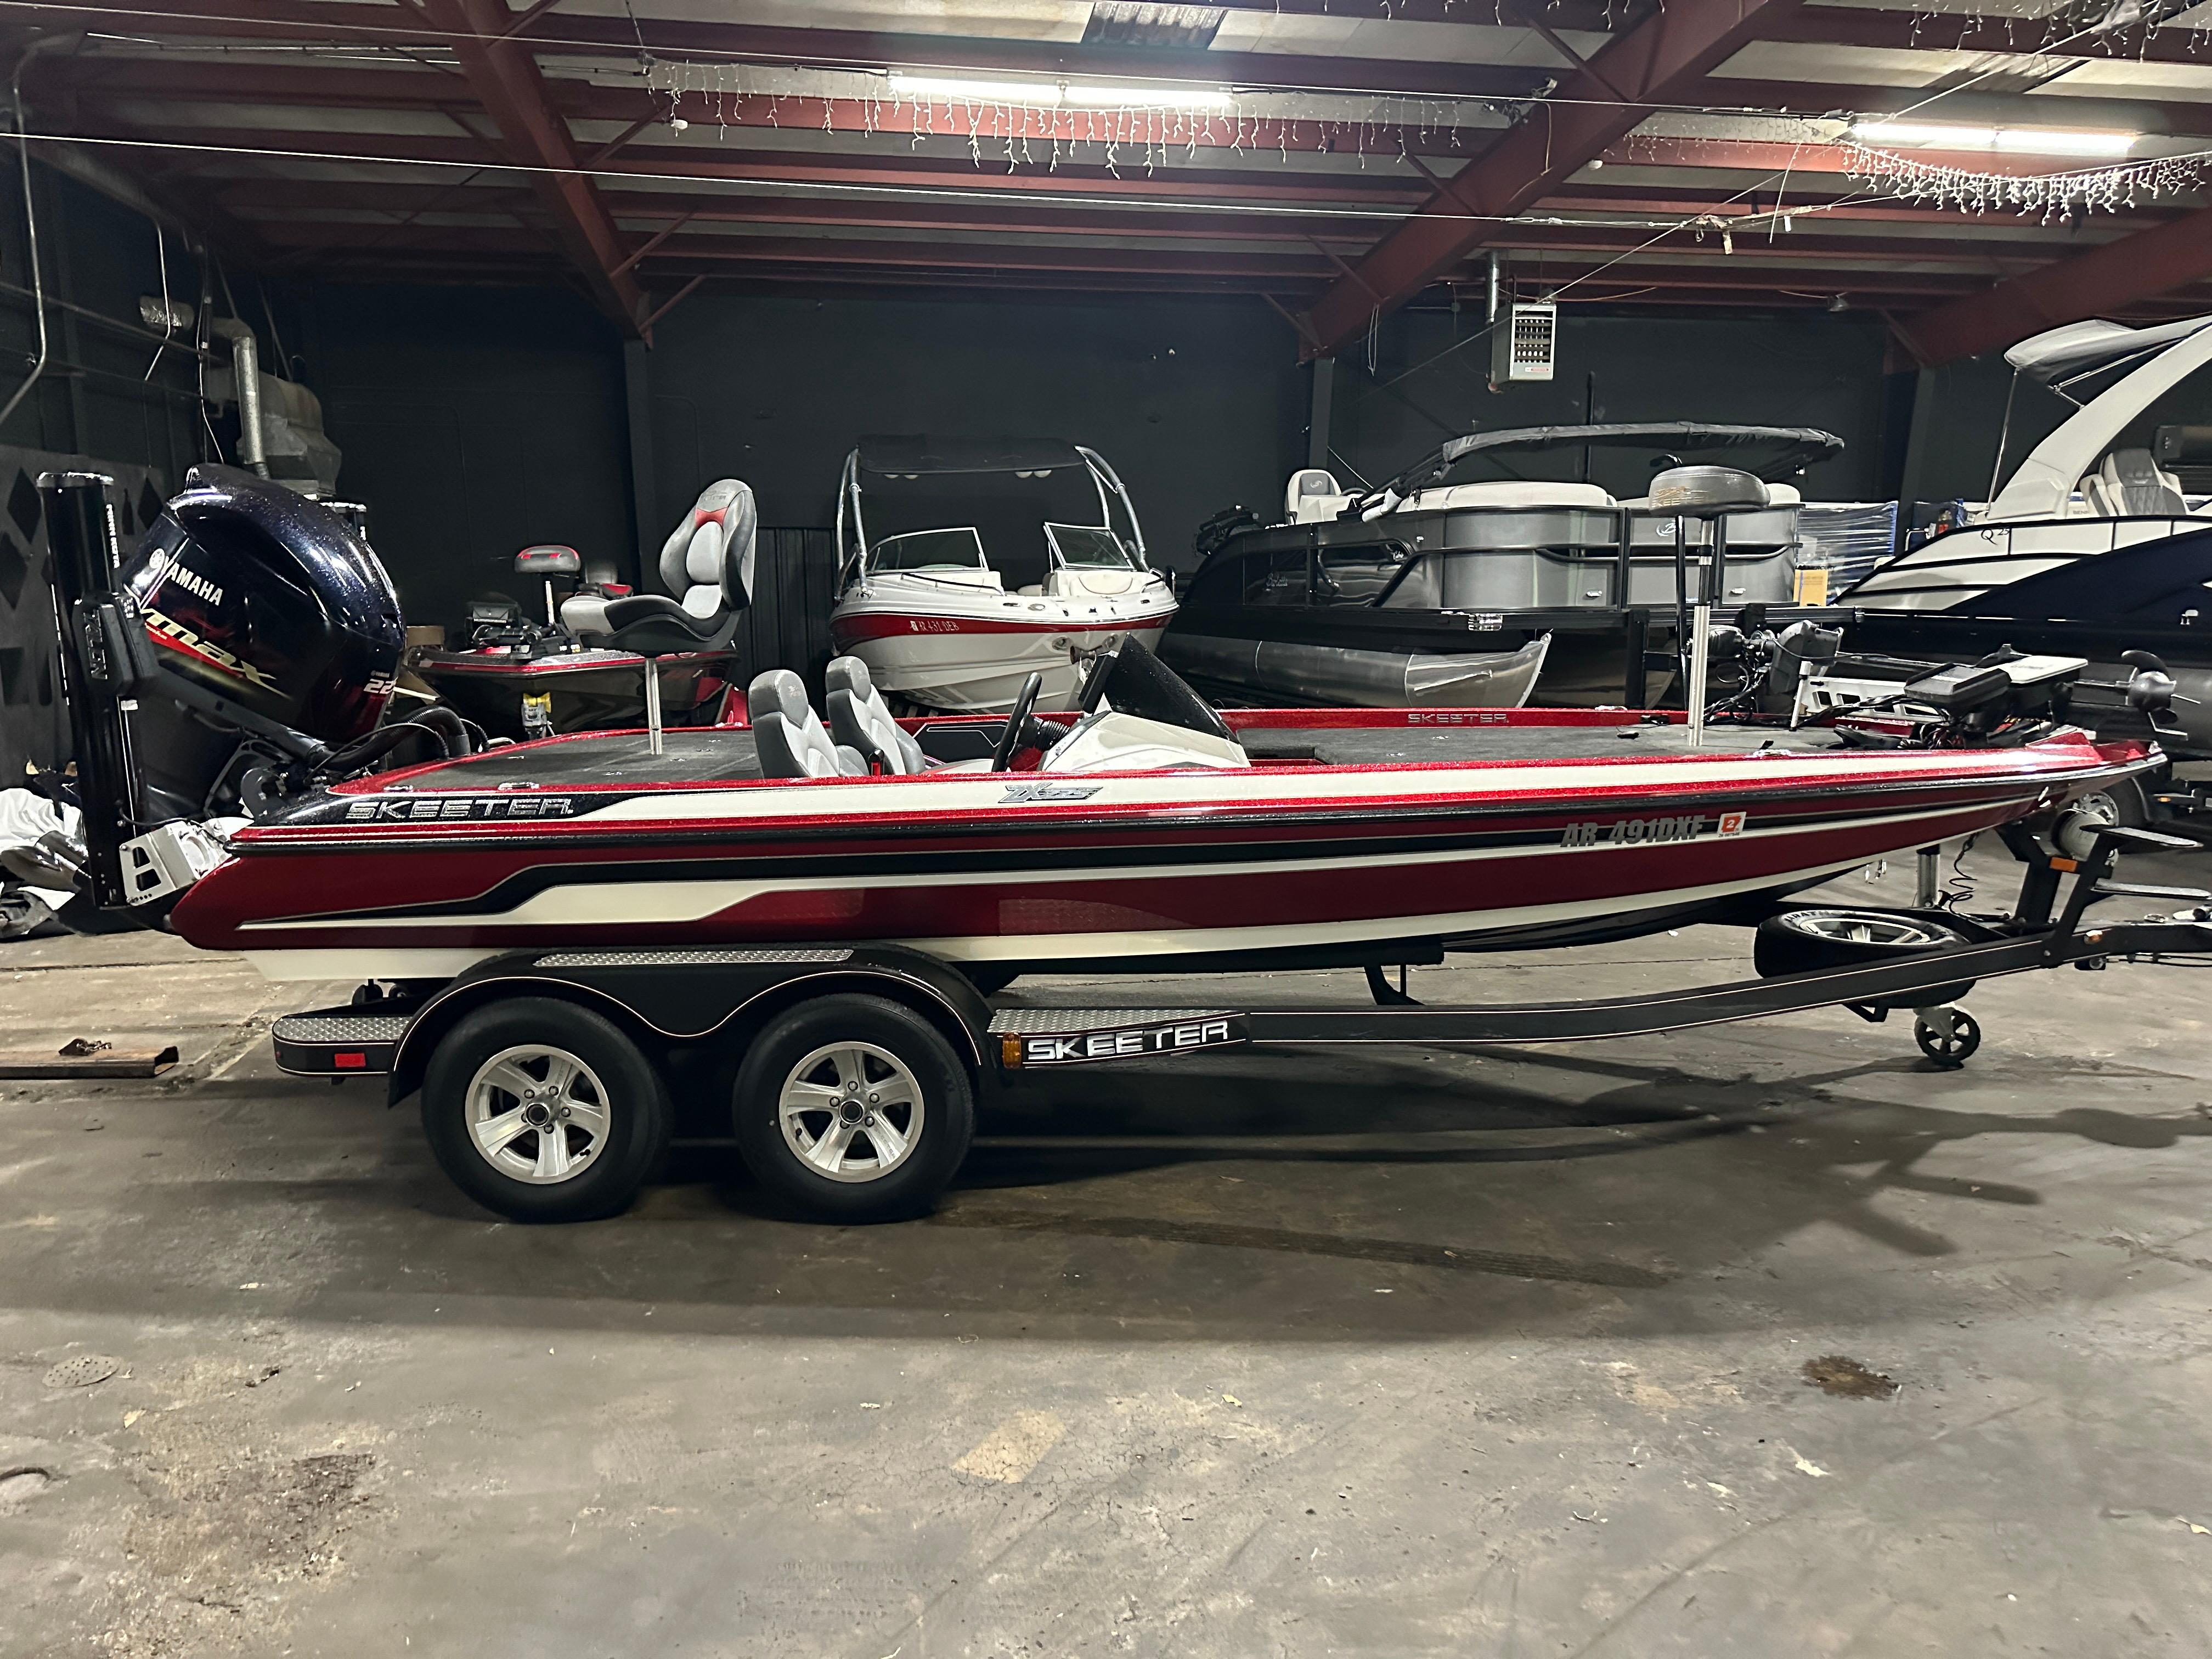 Page 6 of 12 - Used power boats for sale in Arkansas - boats.com